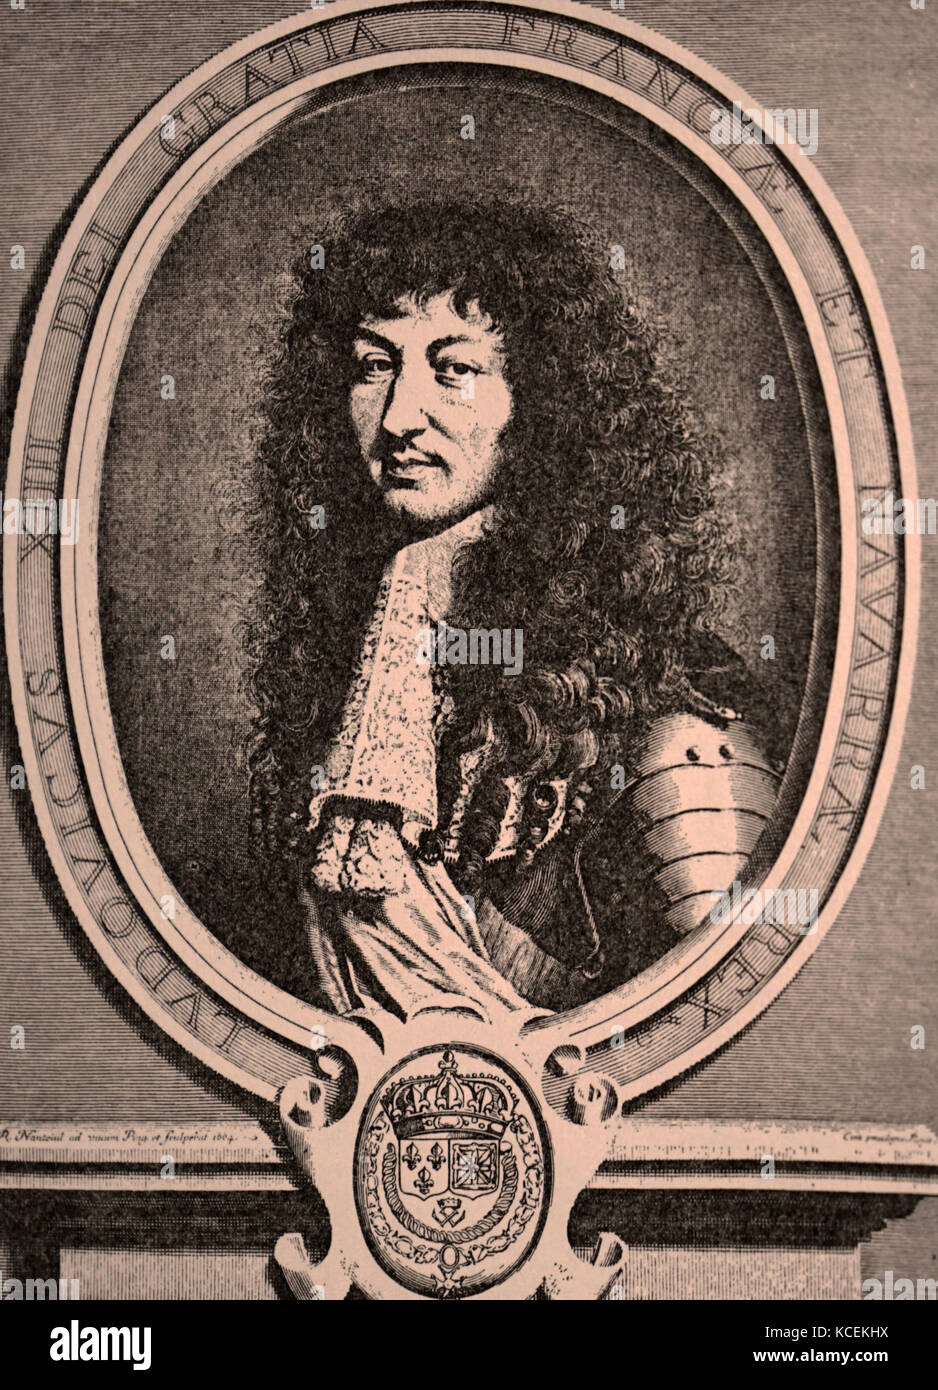 Engraved portrait of Louis XIV of France (1638-1715) King of France by Robert Nanteuil (1623-1678) a French portrait artist, engraver, draughtsman and pastelist. Dated 17th Century Stock Photo